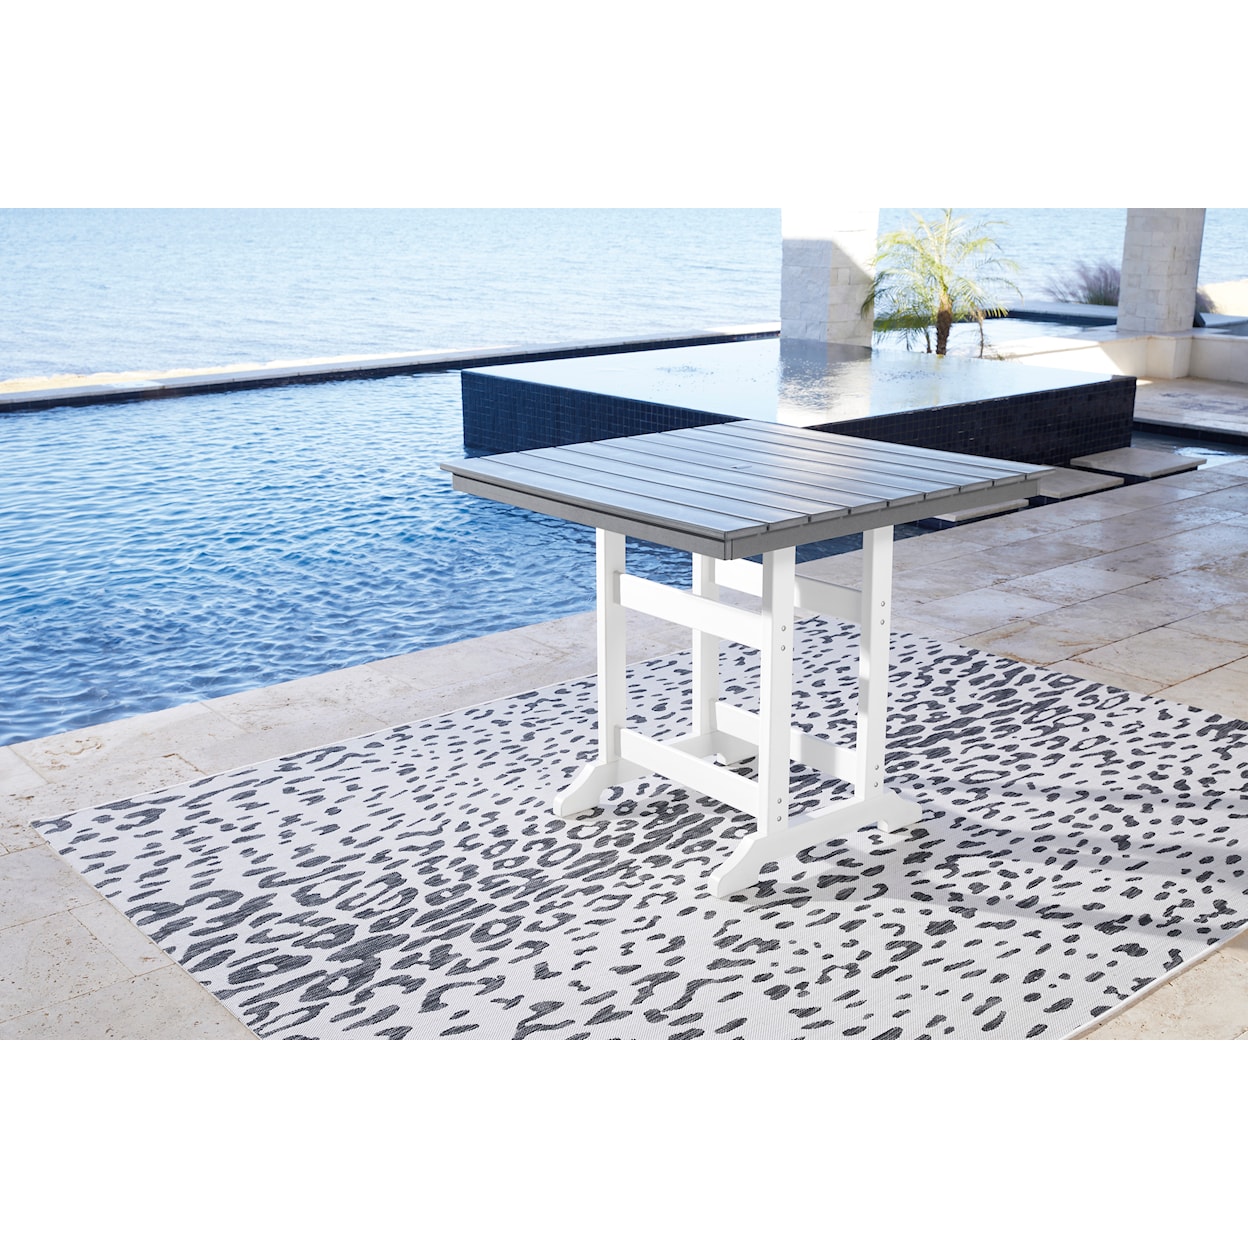 Signature Design by Ashley Transville 3-Piece Counter Table Set